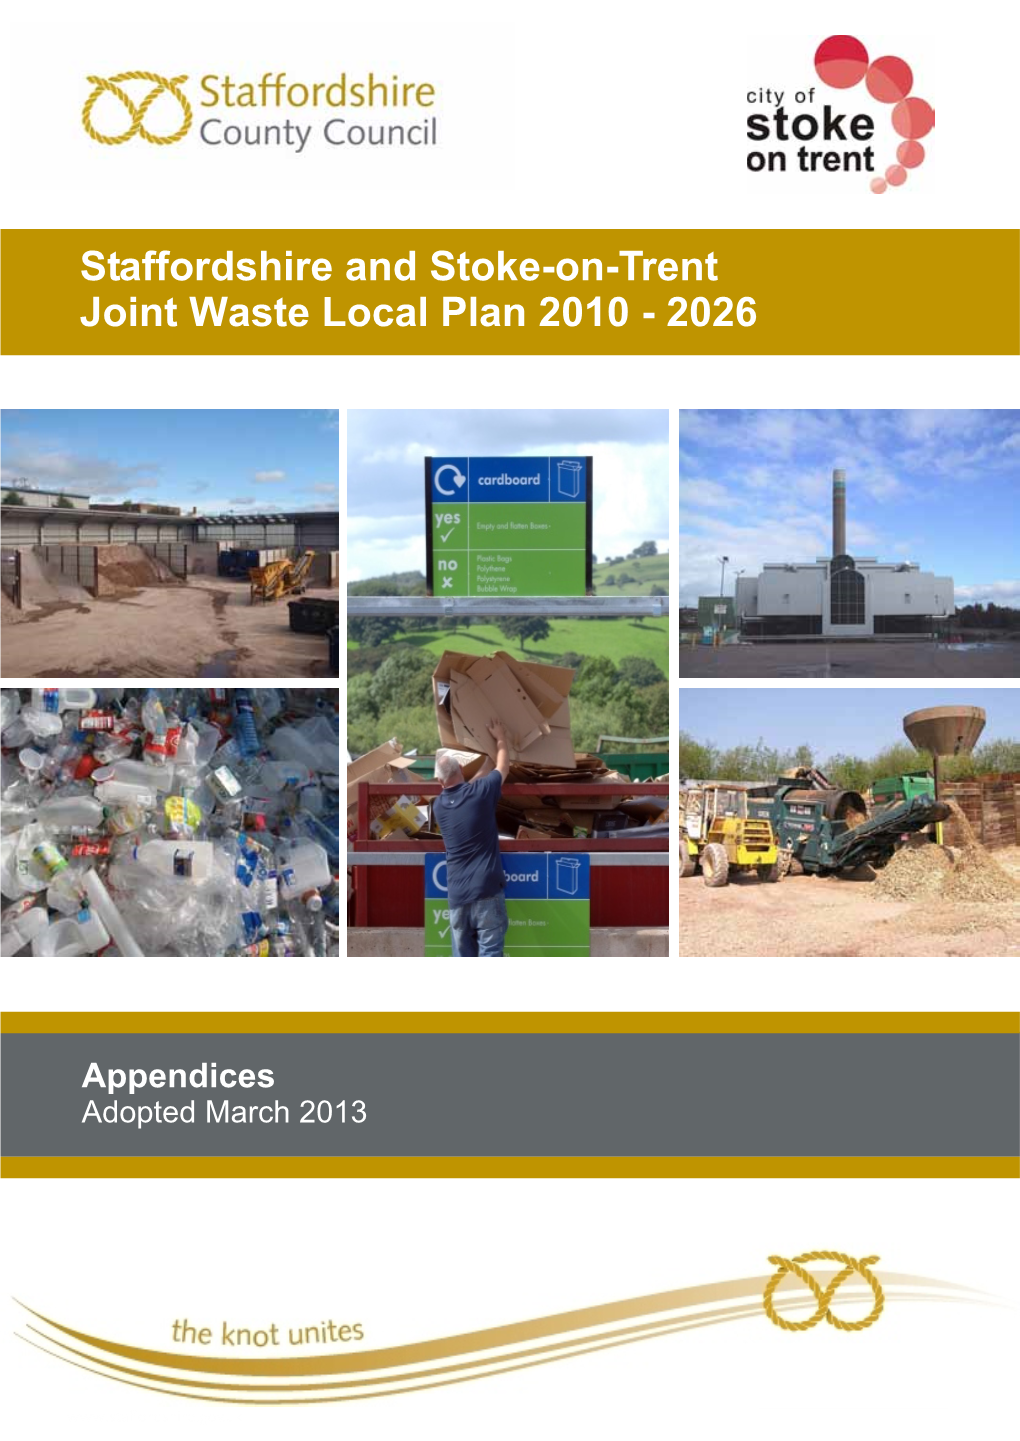 Staffordshire and Stoke-On-Trent Joint Waste Local Plan 2010 - 2026